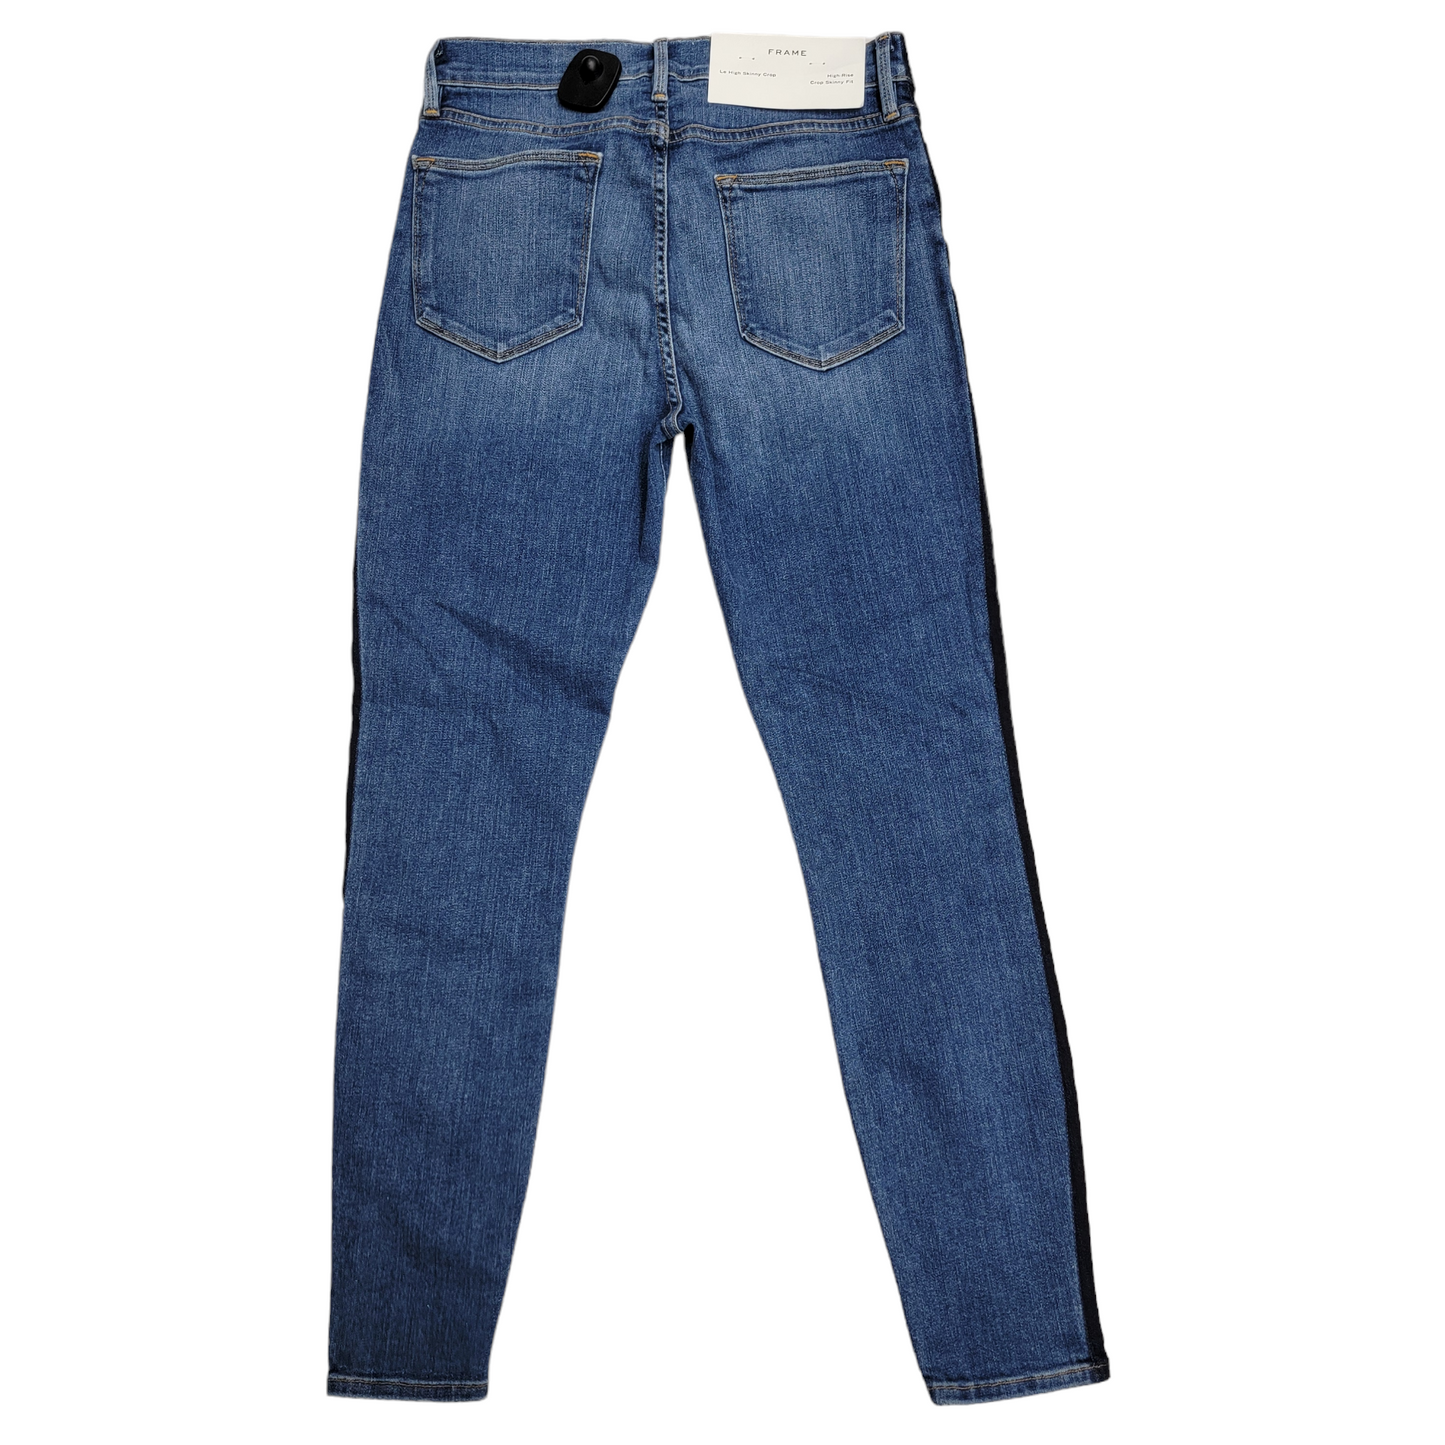 Jeans Cropped By Frame  Size: 8